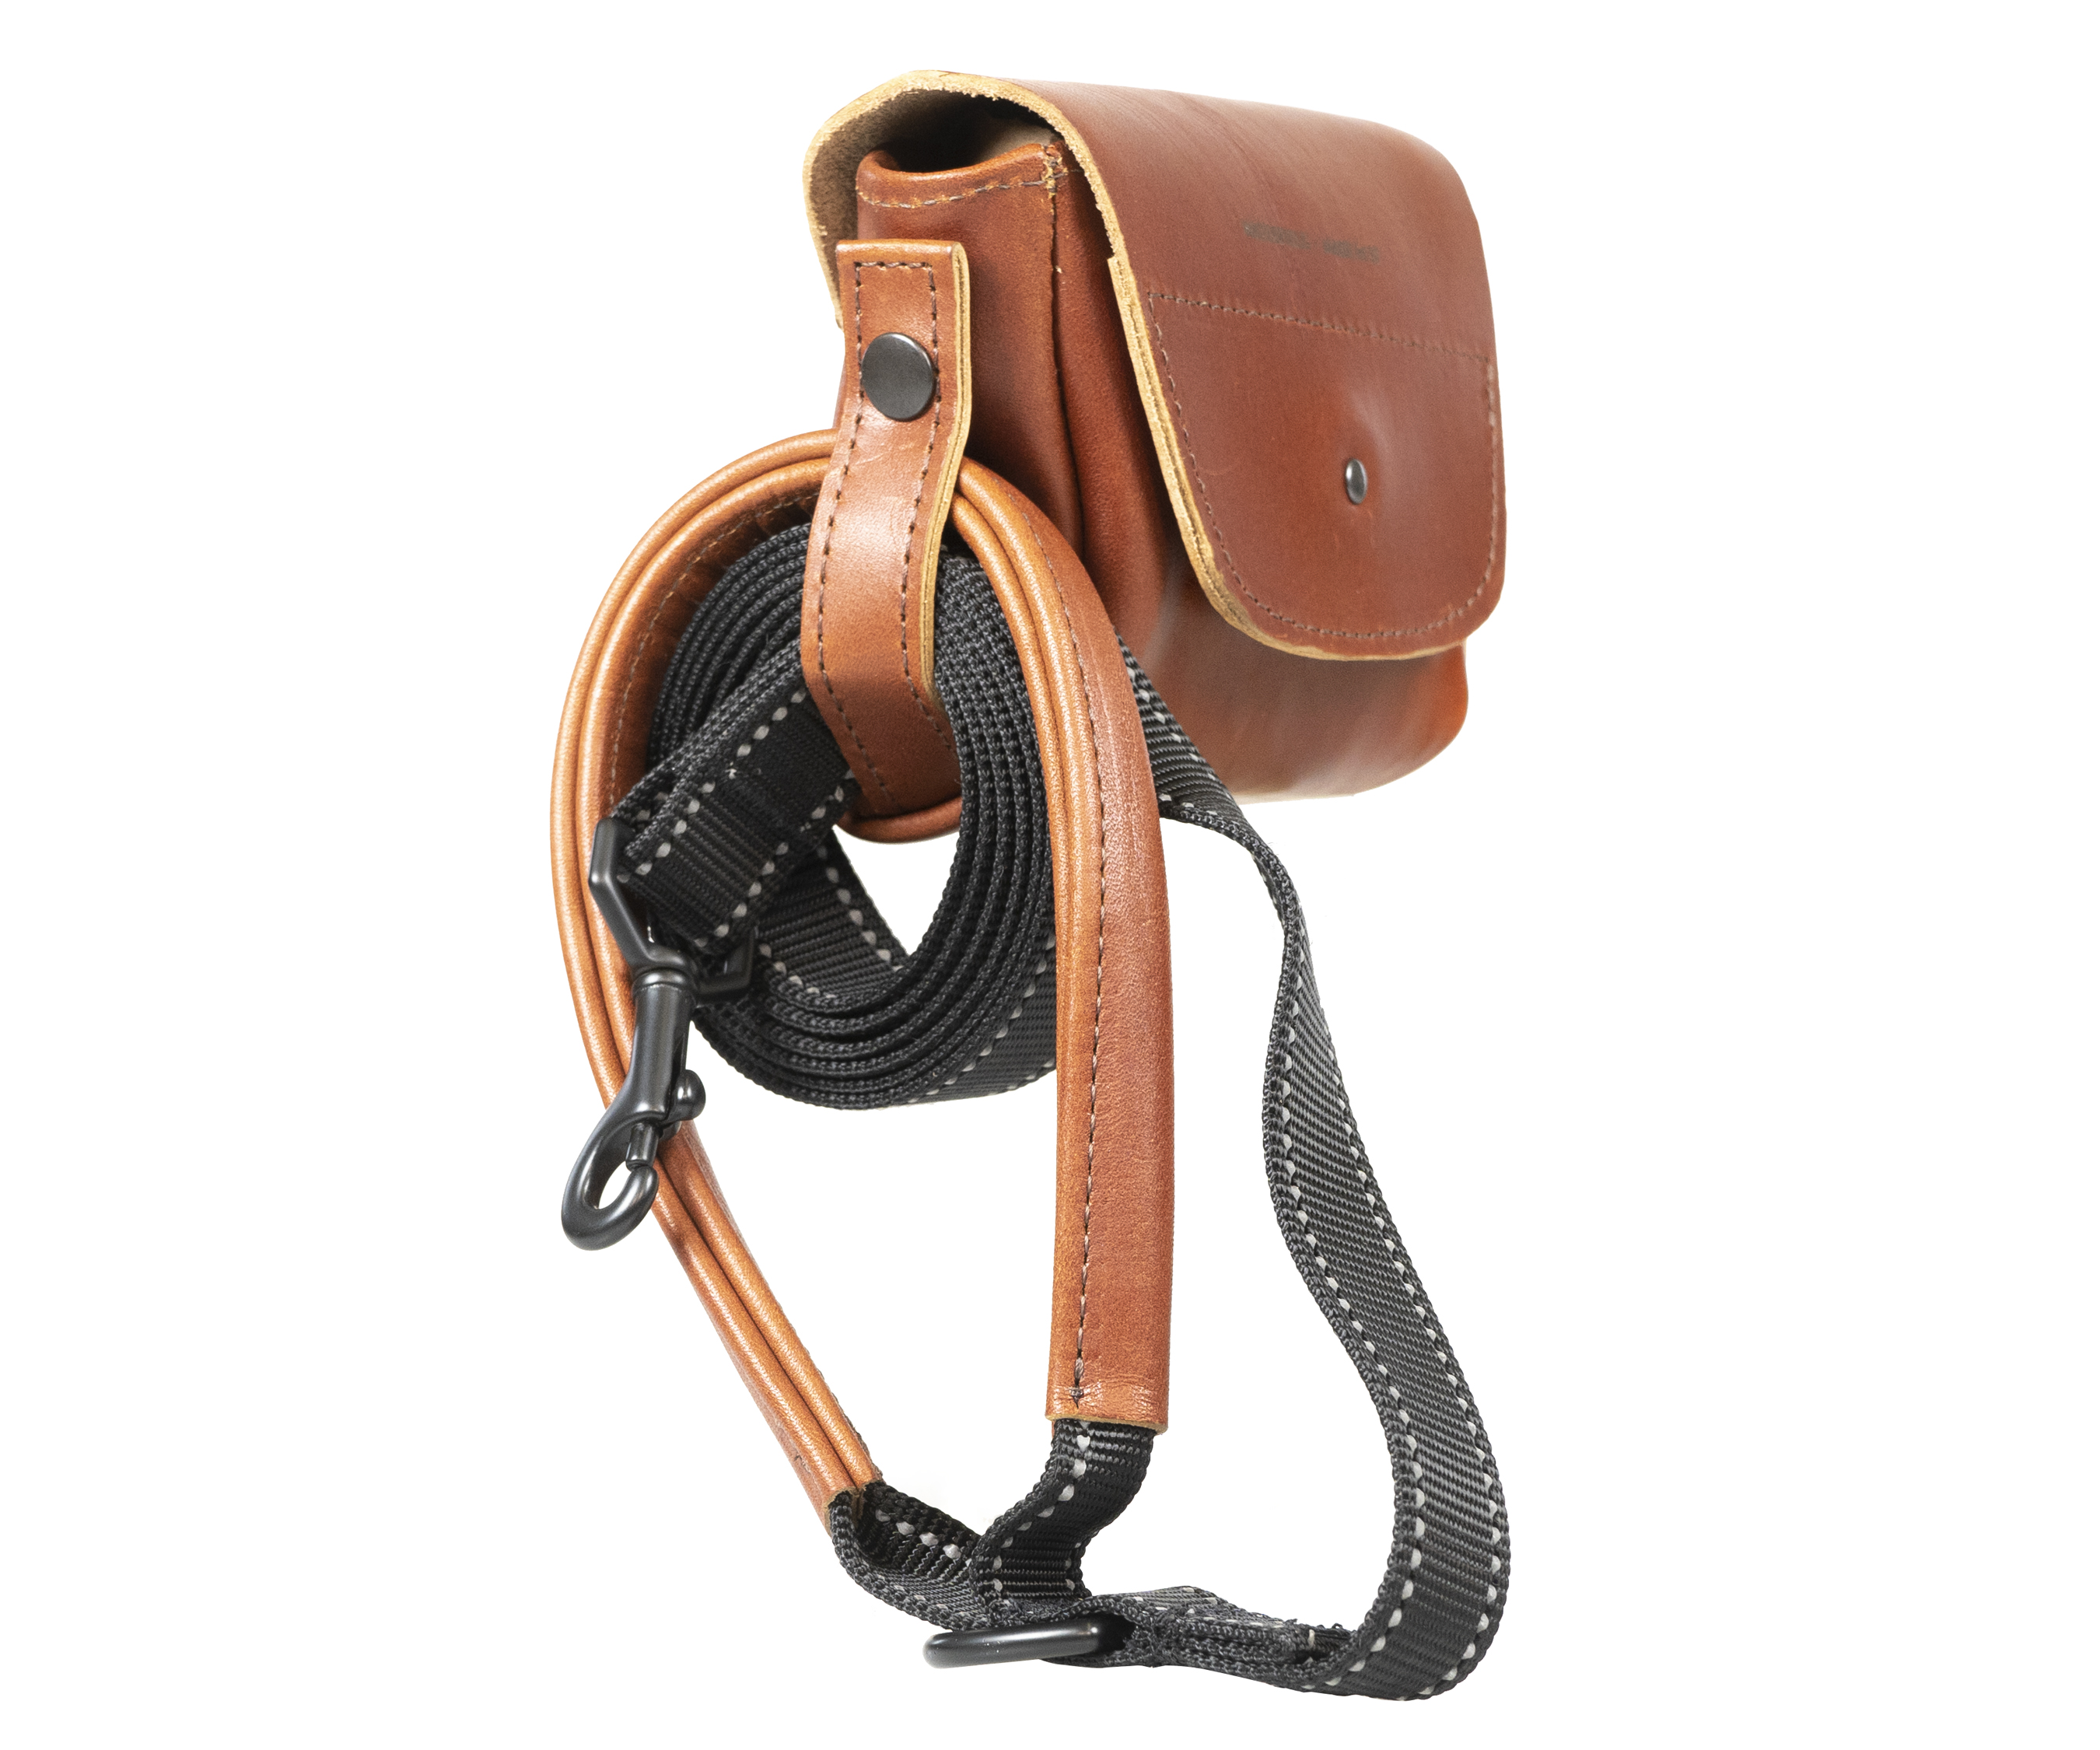 Wag Hip Pack leash attachment